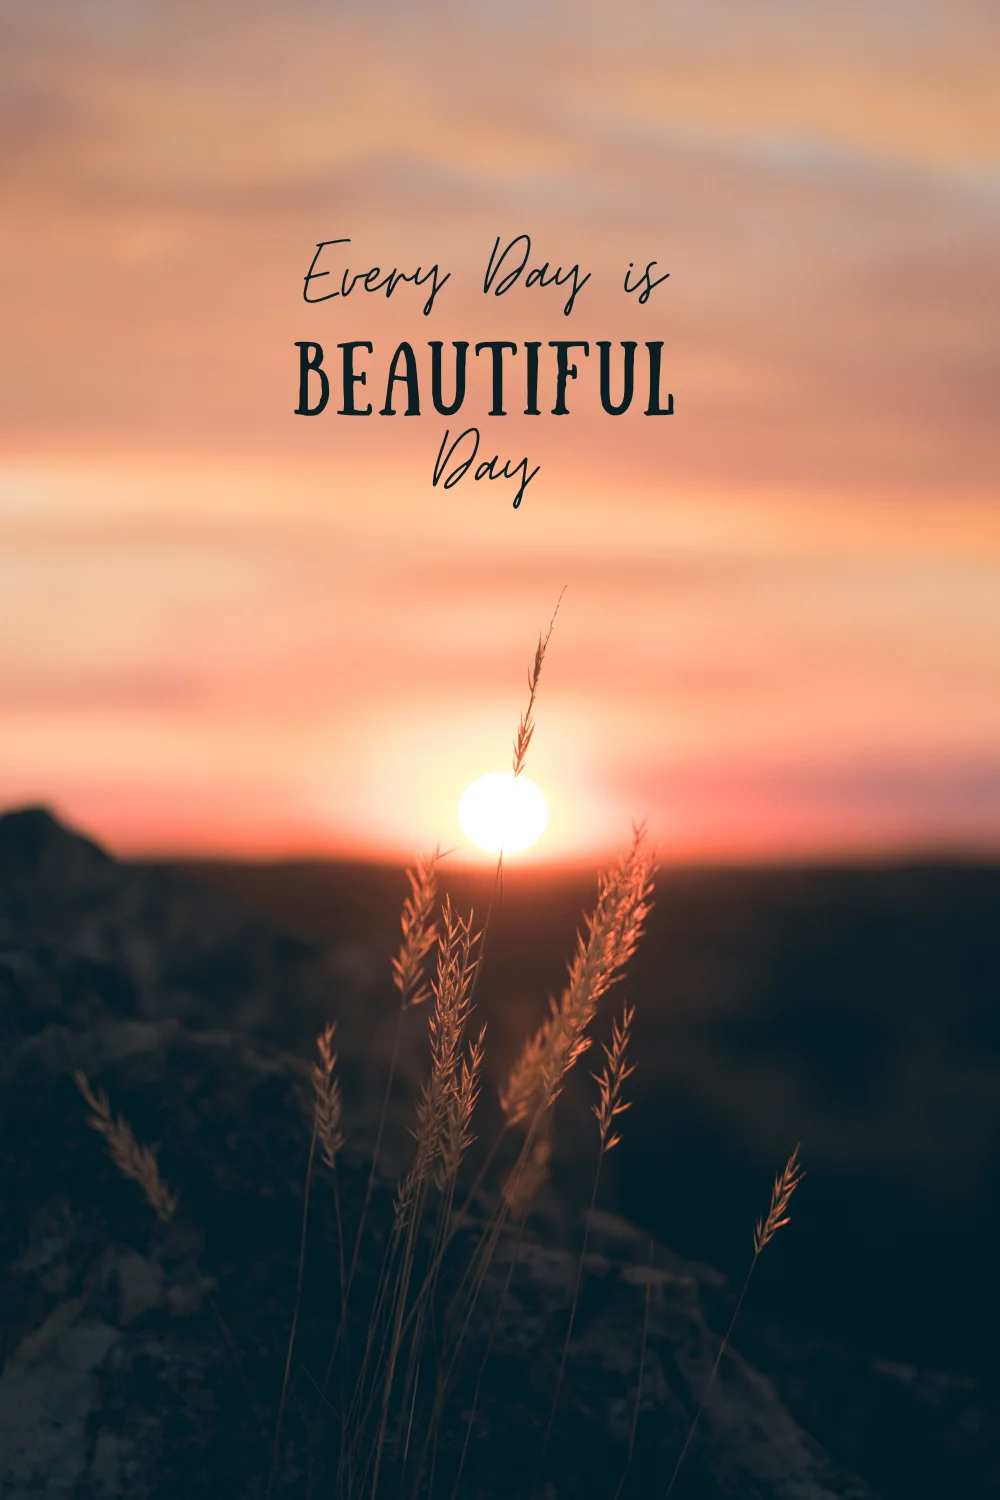 A positive quote that says every day is a beautiful day